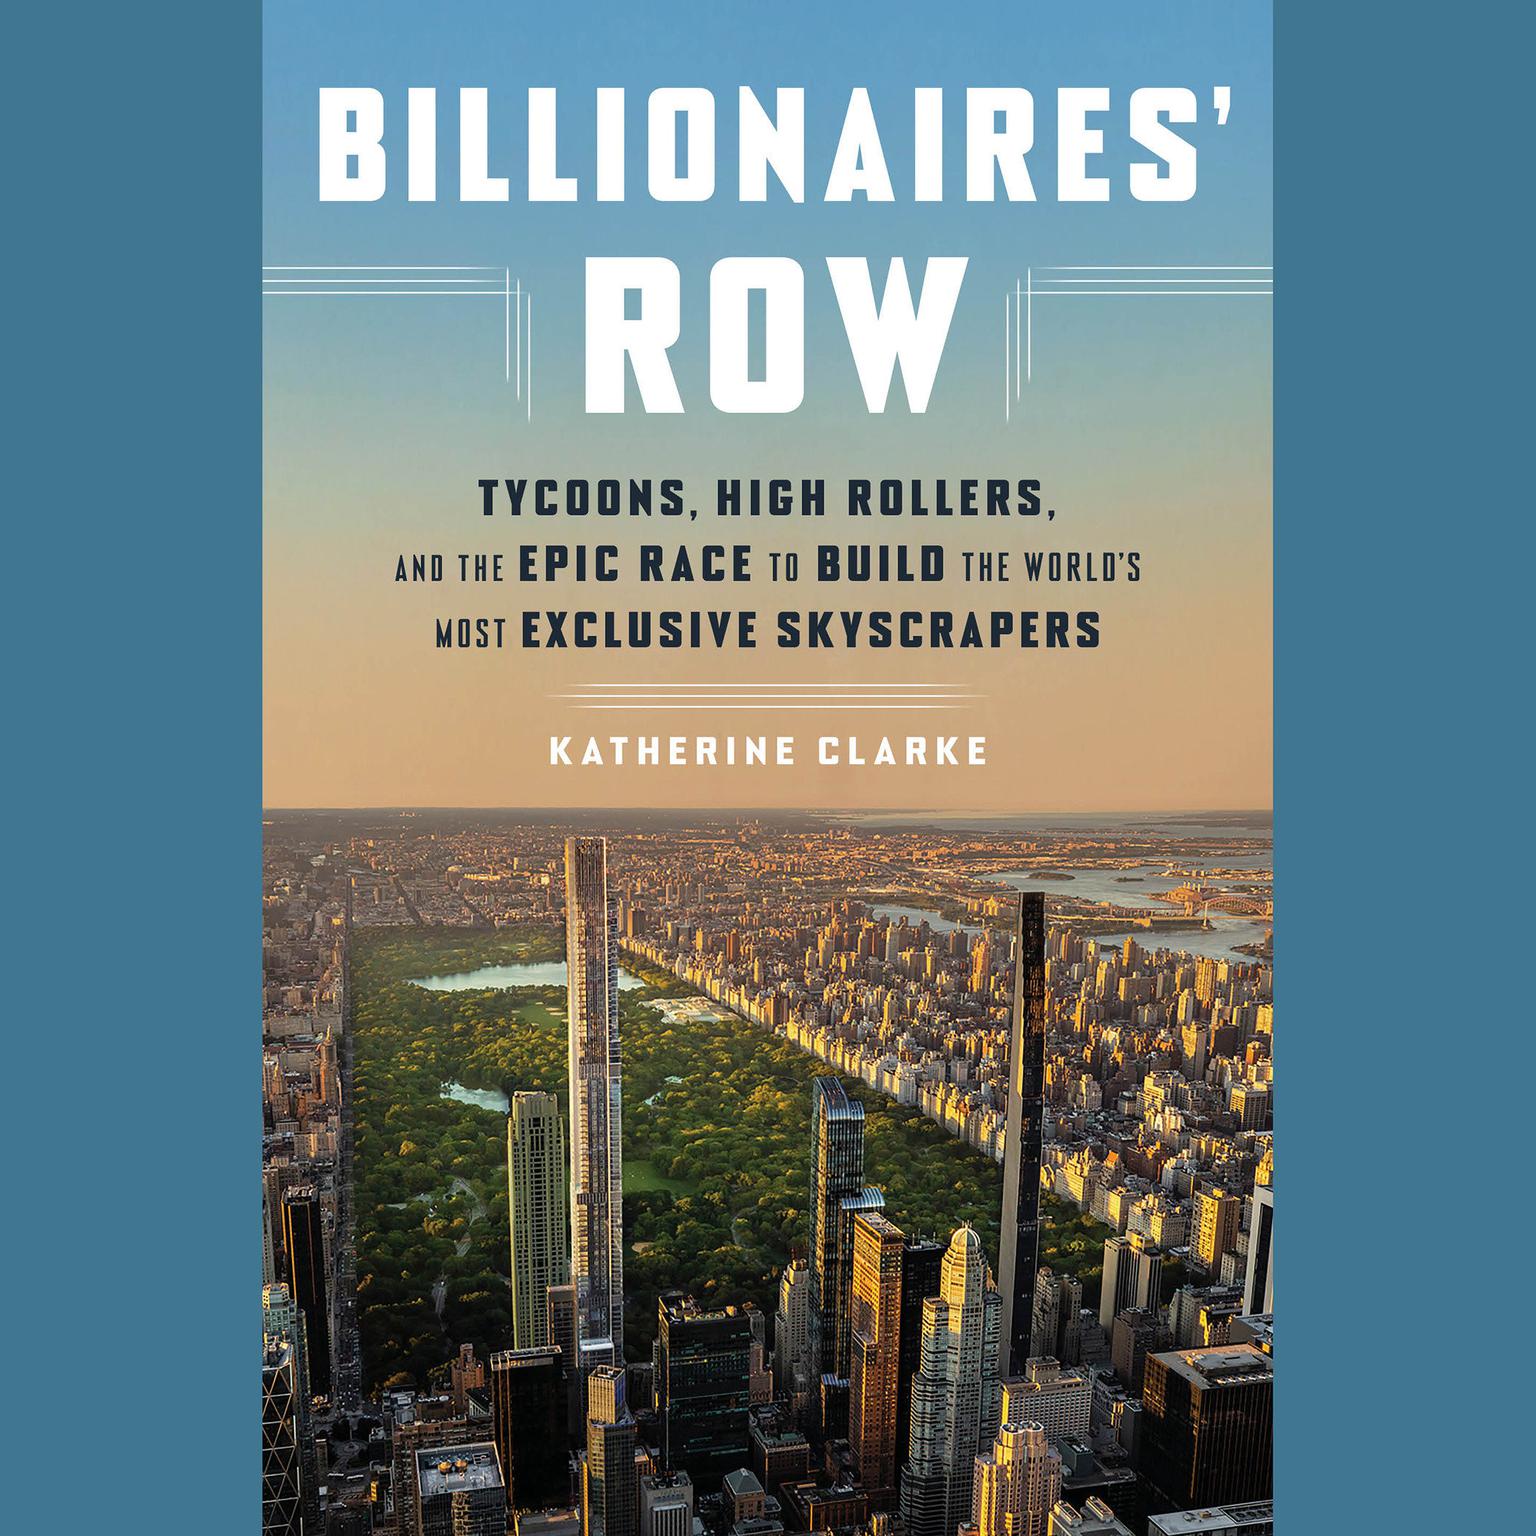 Billionaires Row: Tycoons, High Rollers, and the Epic Race to Build the Worlds Most Exclusive Skyscrapers Audiobook, by Katherine Clarke